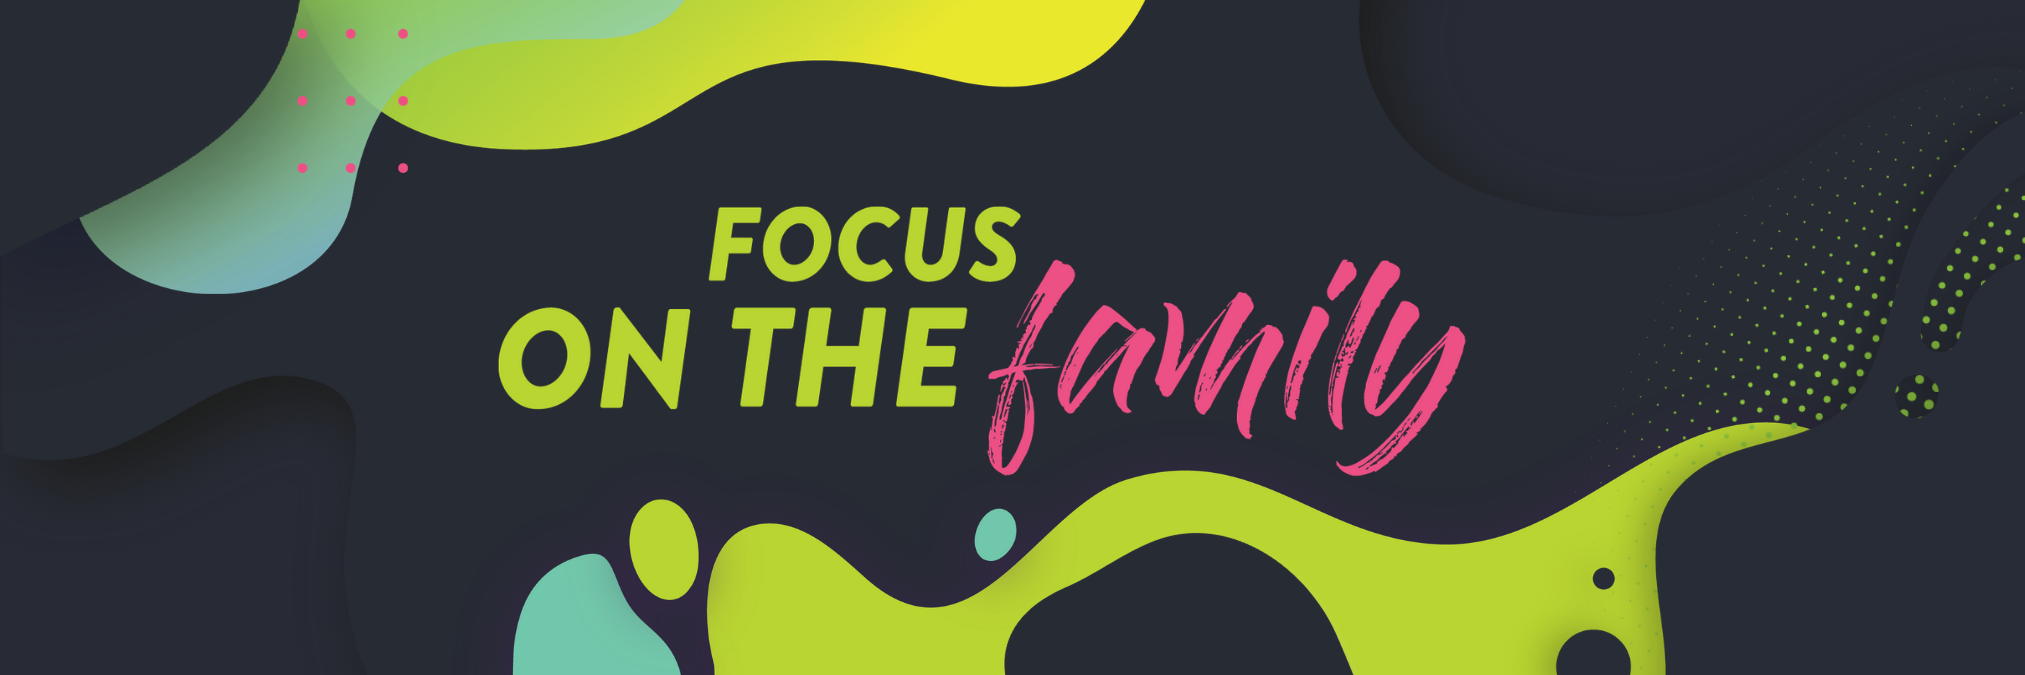 focus on the family